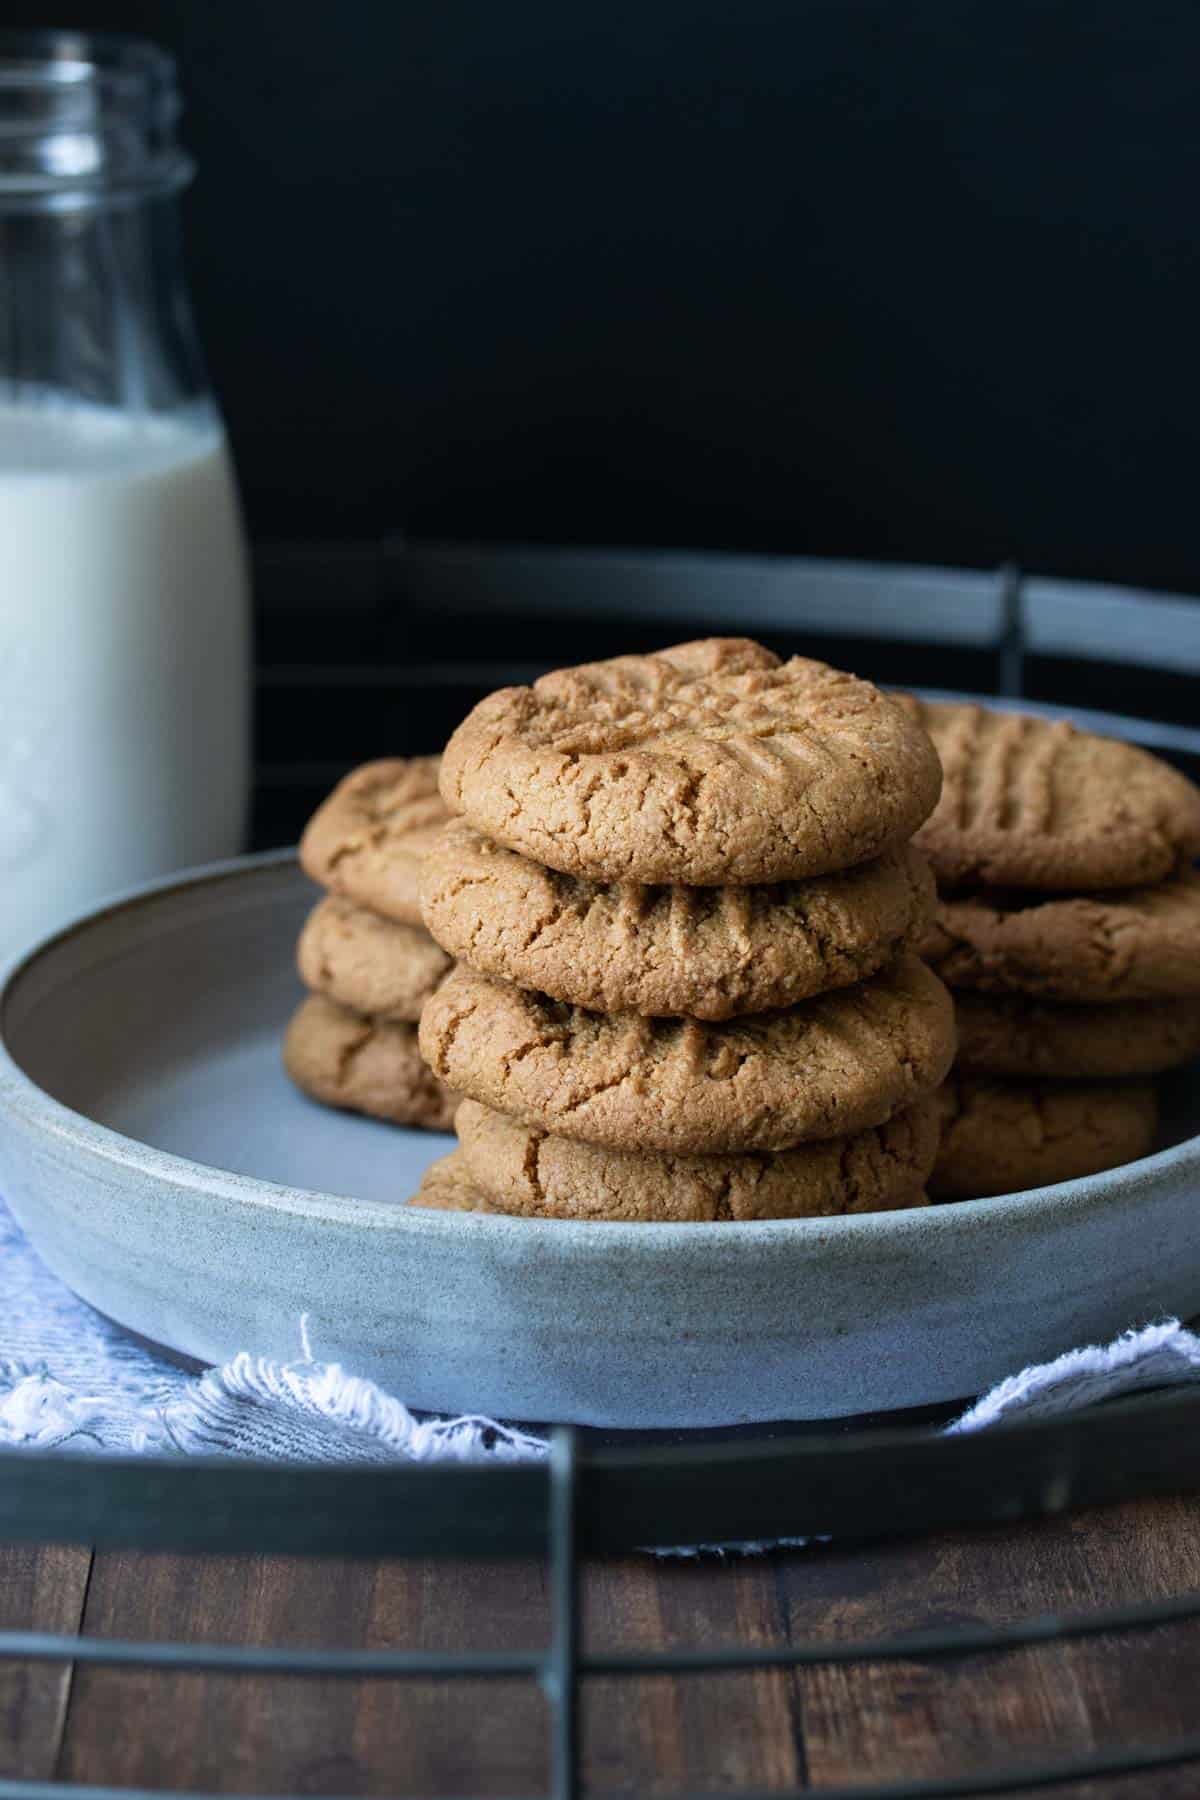 Grey plate with a pile of peanut butter cookies on it next to a glass of milk